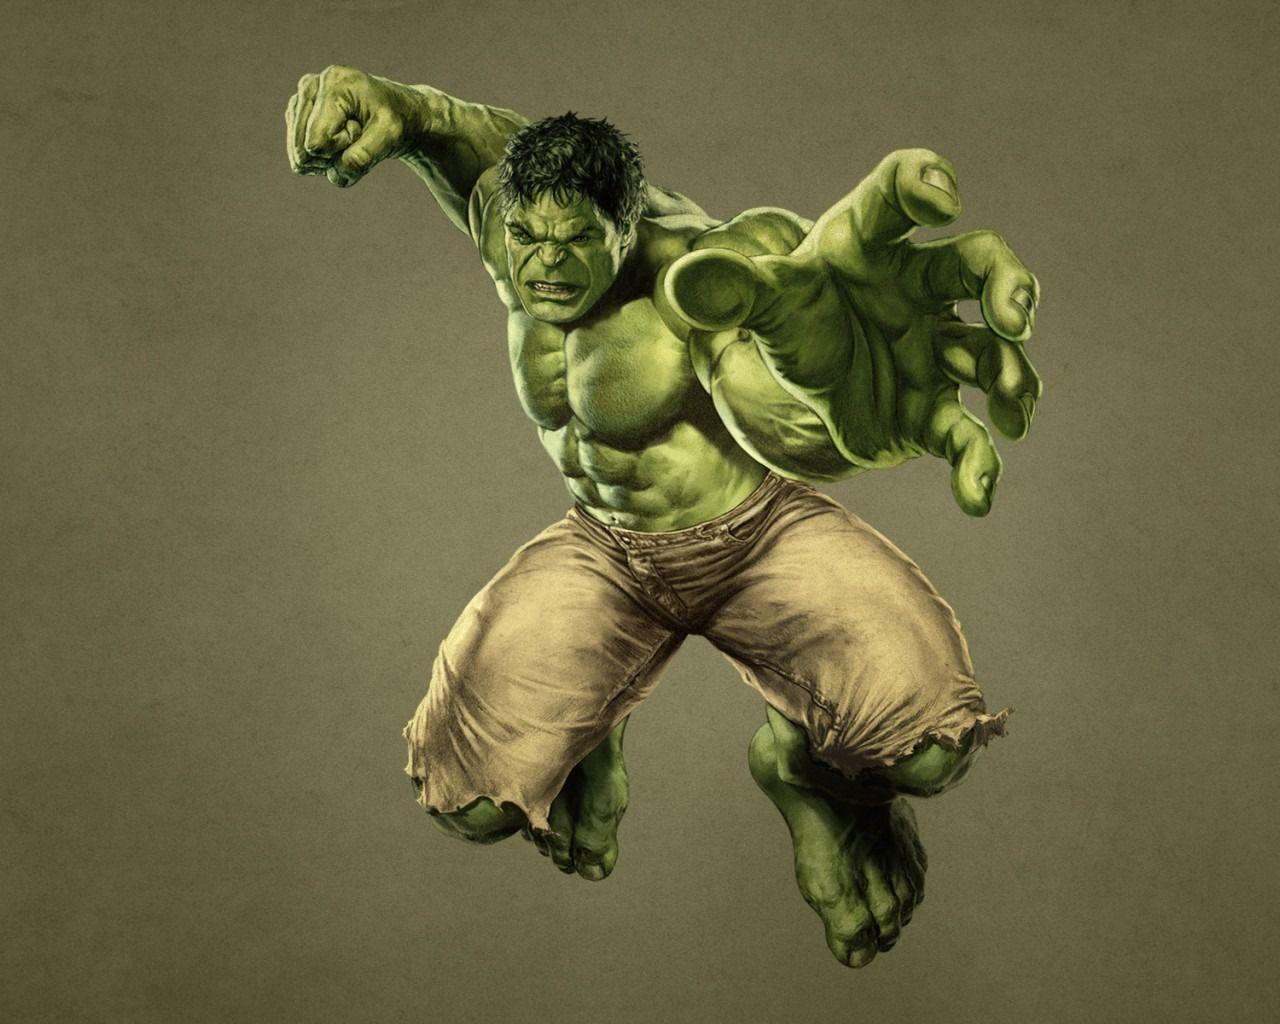 Avengers Movie Wallpapers Hulk Image & Pictures